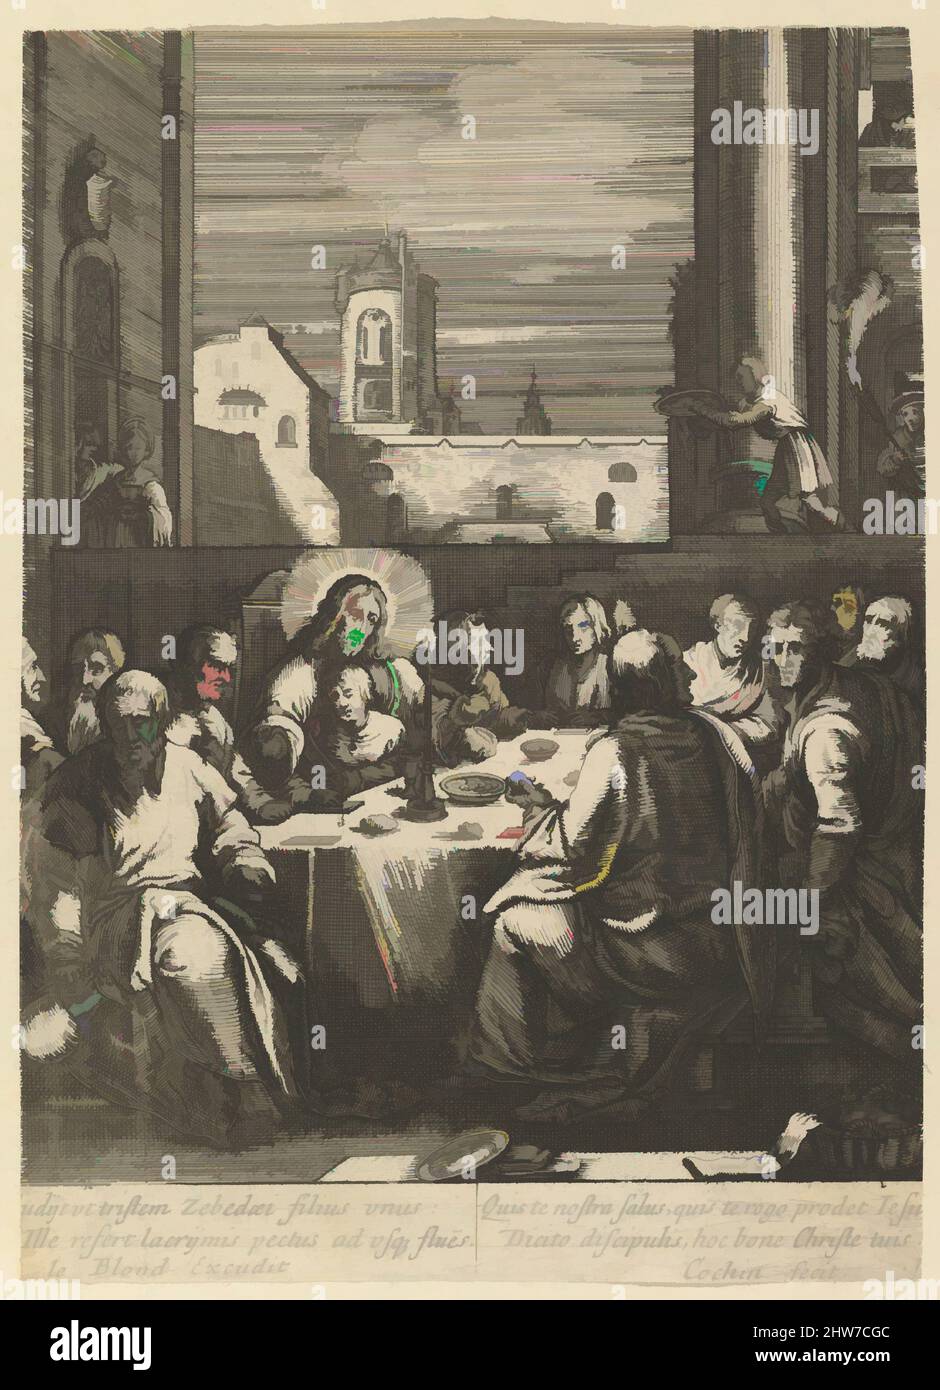 Art inspired by The Last Supper, from The Passion of Christ, mid 17th century, Etching, Sheet: 5 3/8 × 7 13/16 in. (13.6 × 19.8 cm), Prints, Nicolas Cochin (French, Troyes 1610–1686 Paris), After Hendrick Goltzius (Netherlandish, Mühlbracht 1558–1617 Haarlem, Classic works modernized by Artotop with a splash of modernity. Shapes, color and value, eye-catching visual impact on art. Emotions through freedom of artworks in a contemporary way. A timeless message pursuing a wildly creative new direction. Artists turning to the digital medium and creating the Artotop NFT Stock Photo